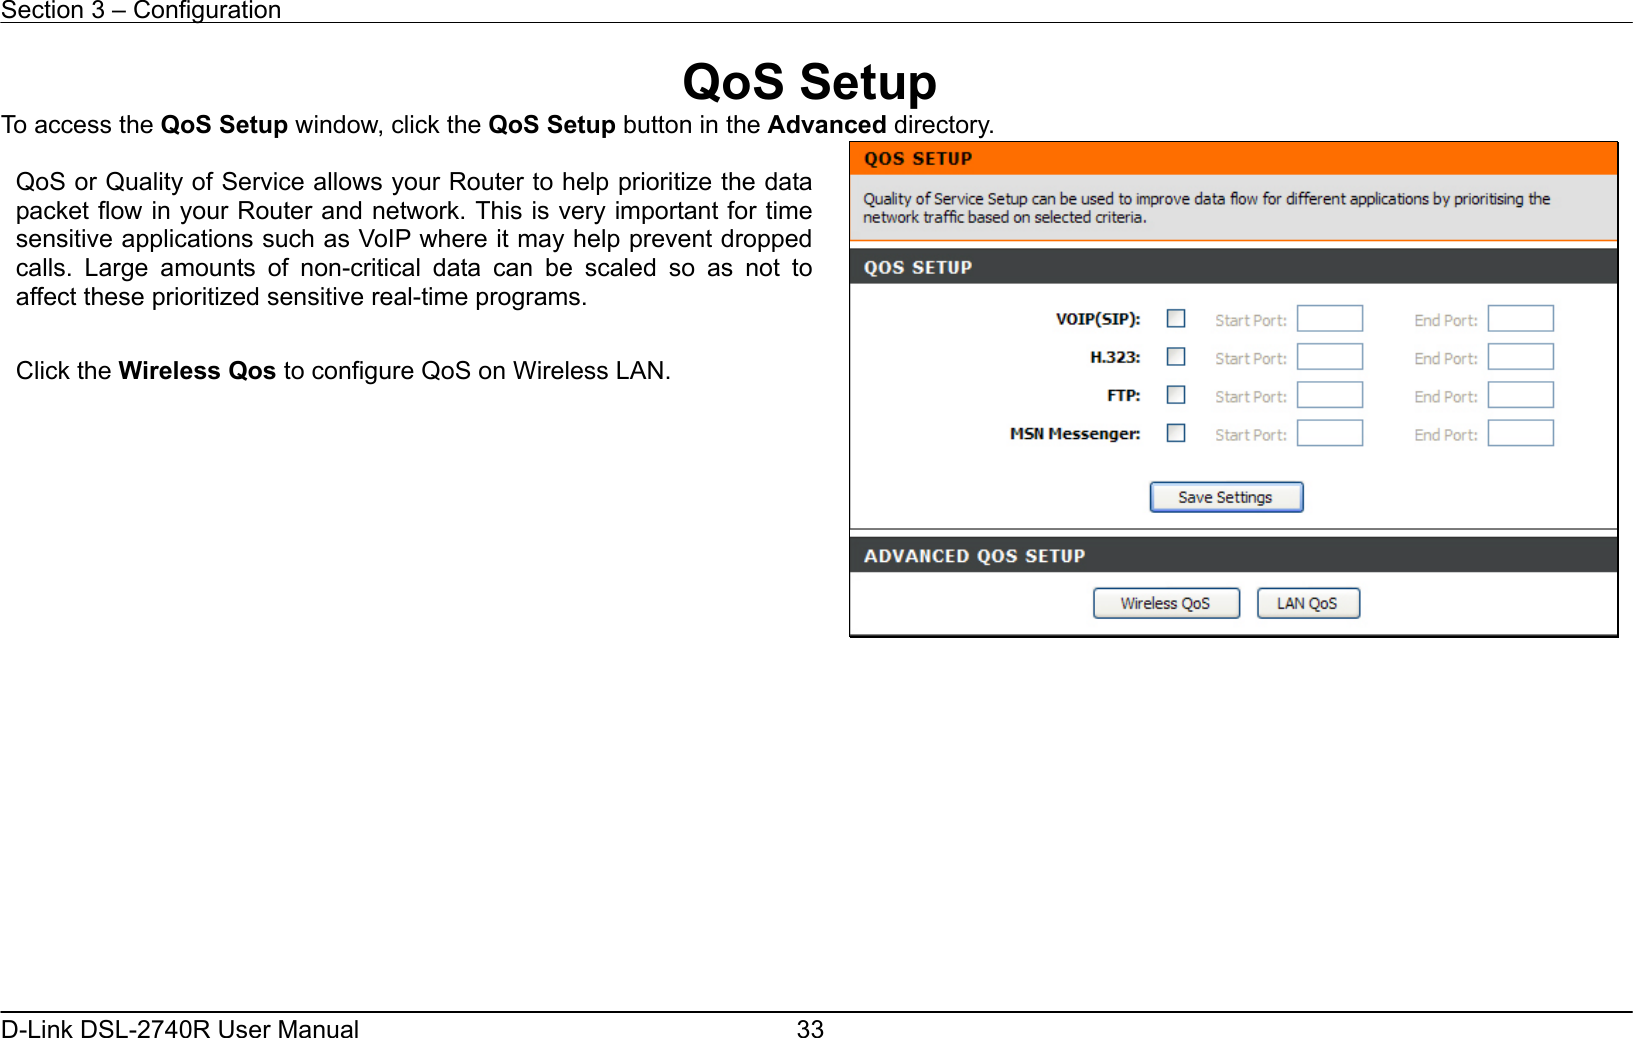 Section 3 – Configuration   D-Link DSL-2740R User Manual  33QoS Setup To access the QoS Setup window, click the QoS Setup button in the Advanced directory.               QoS or Quality of Service allows your Router to help prioritize the datapacket flow in your Router and network. This is very important for timesensitive applications such as VoIP where it may help prevent droppedcalls. Large amounts of non-critical data can be scaled so as not toaffect these prioritized sensitive real-time programs.  Click the Wireless Qos to configure QoS on Wireless LAN.  